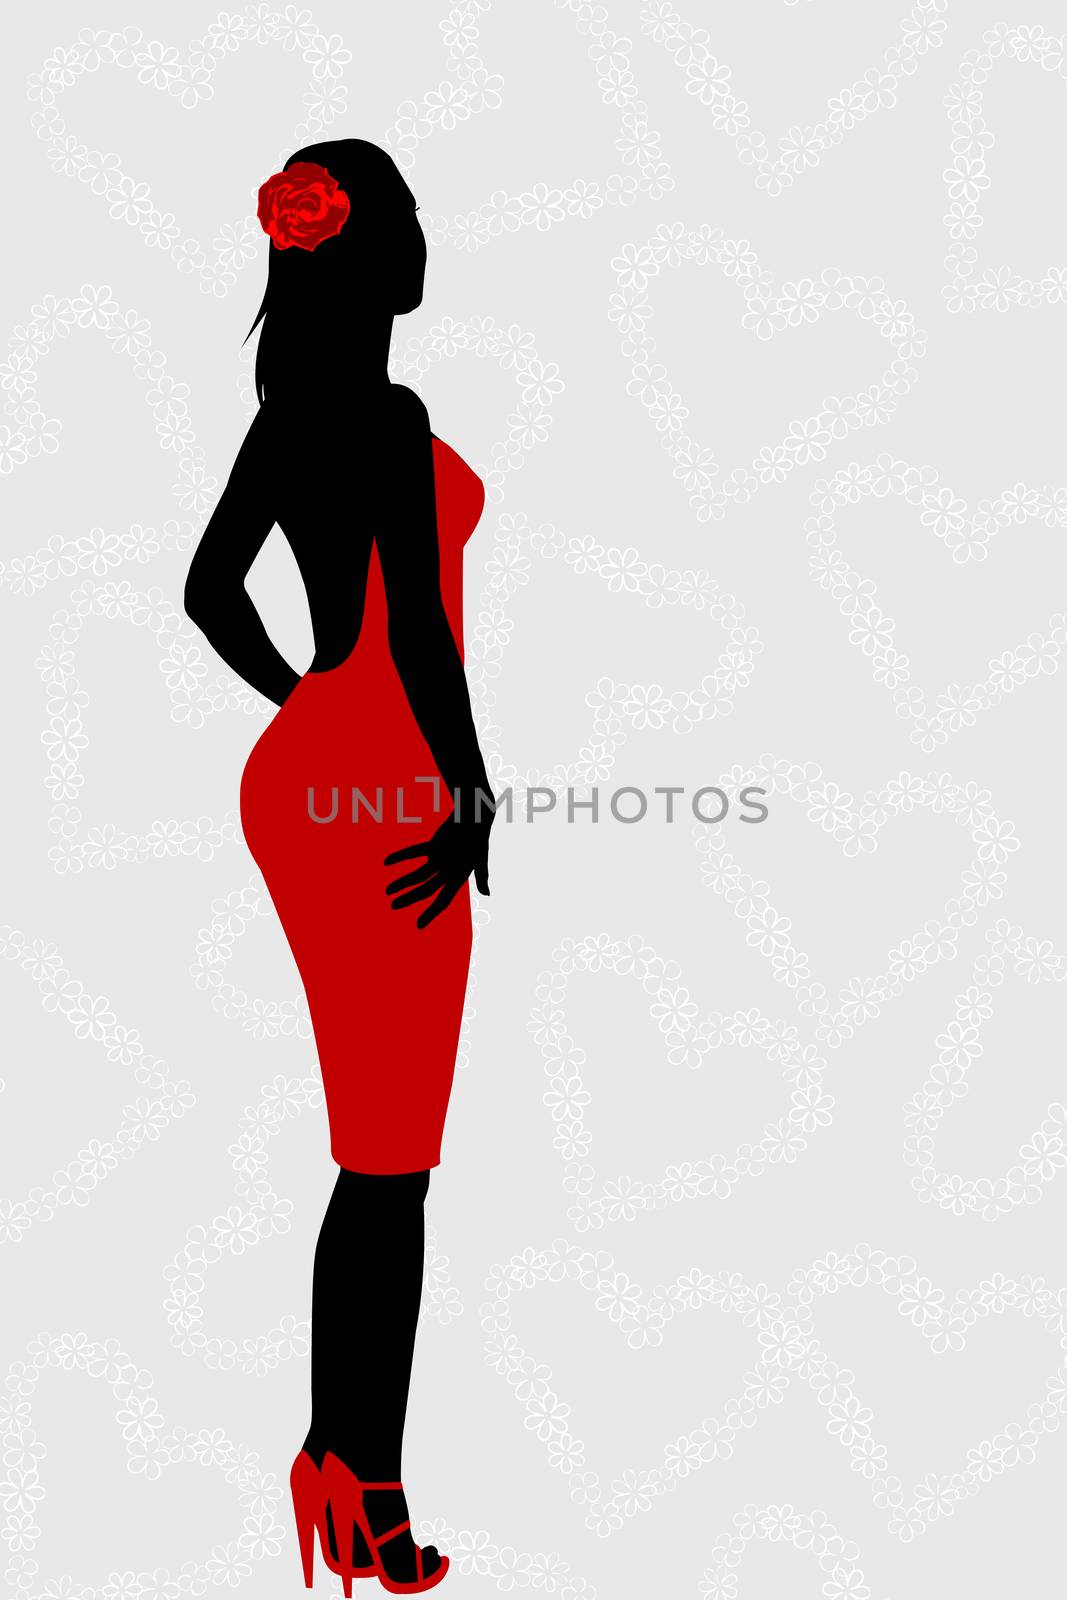 Red dress woman silhouette with rose in her hair